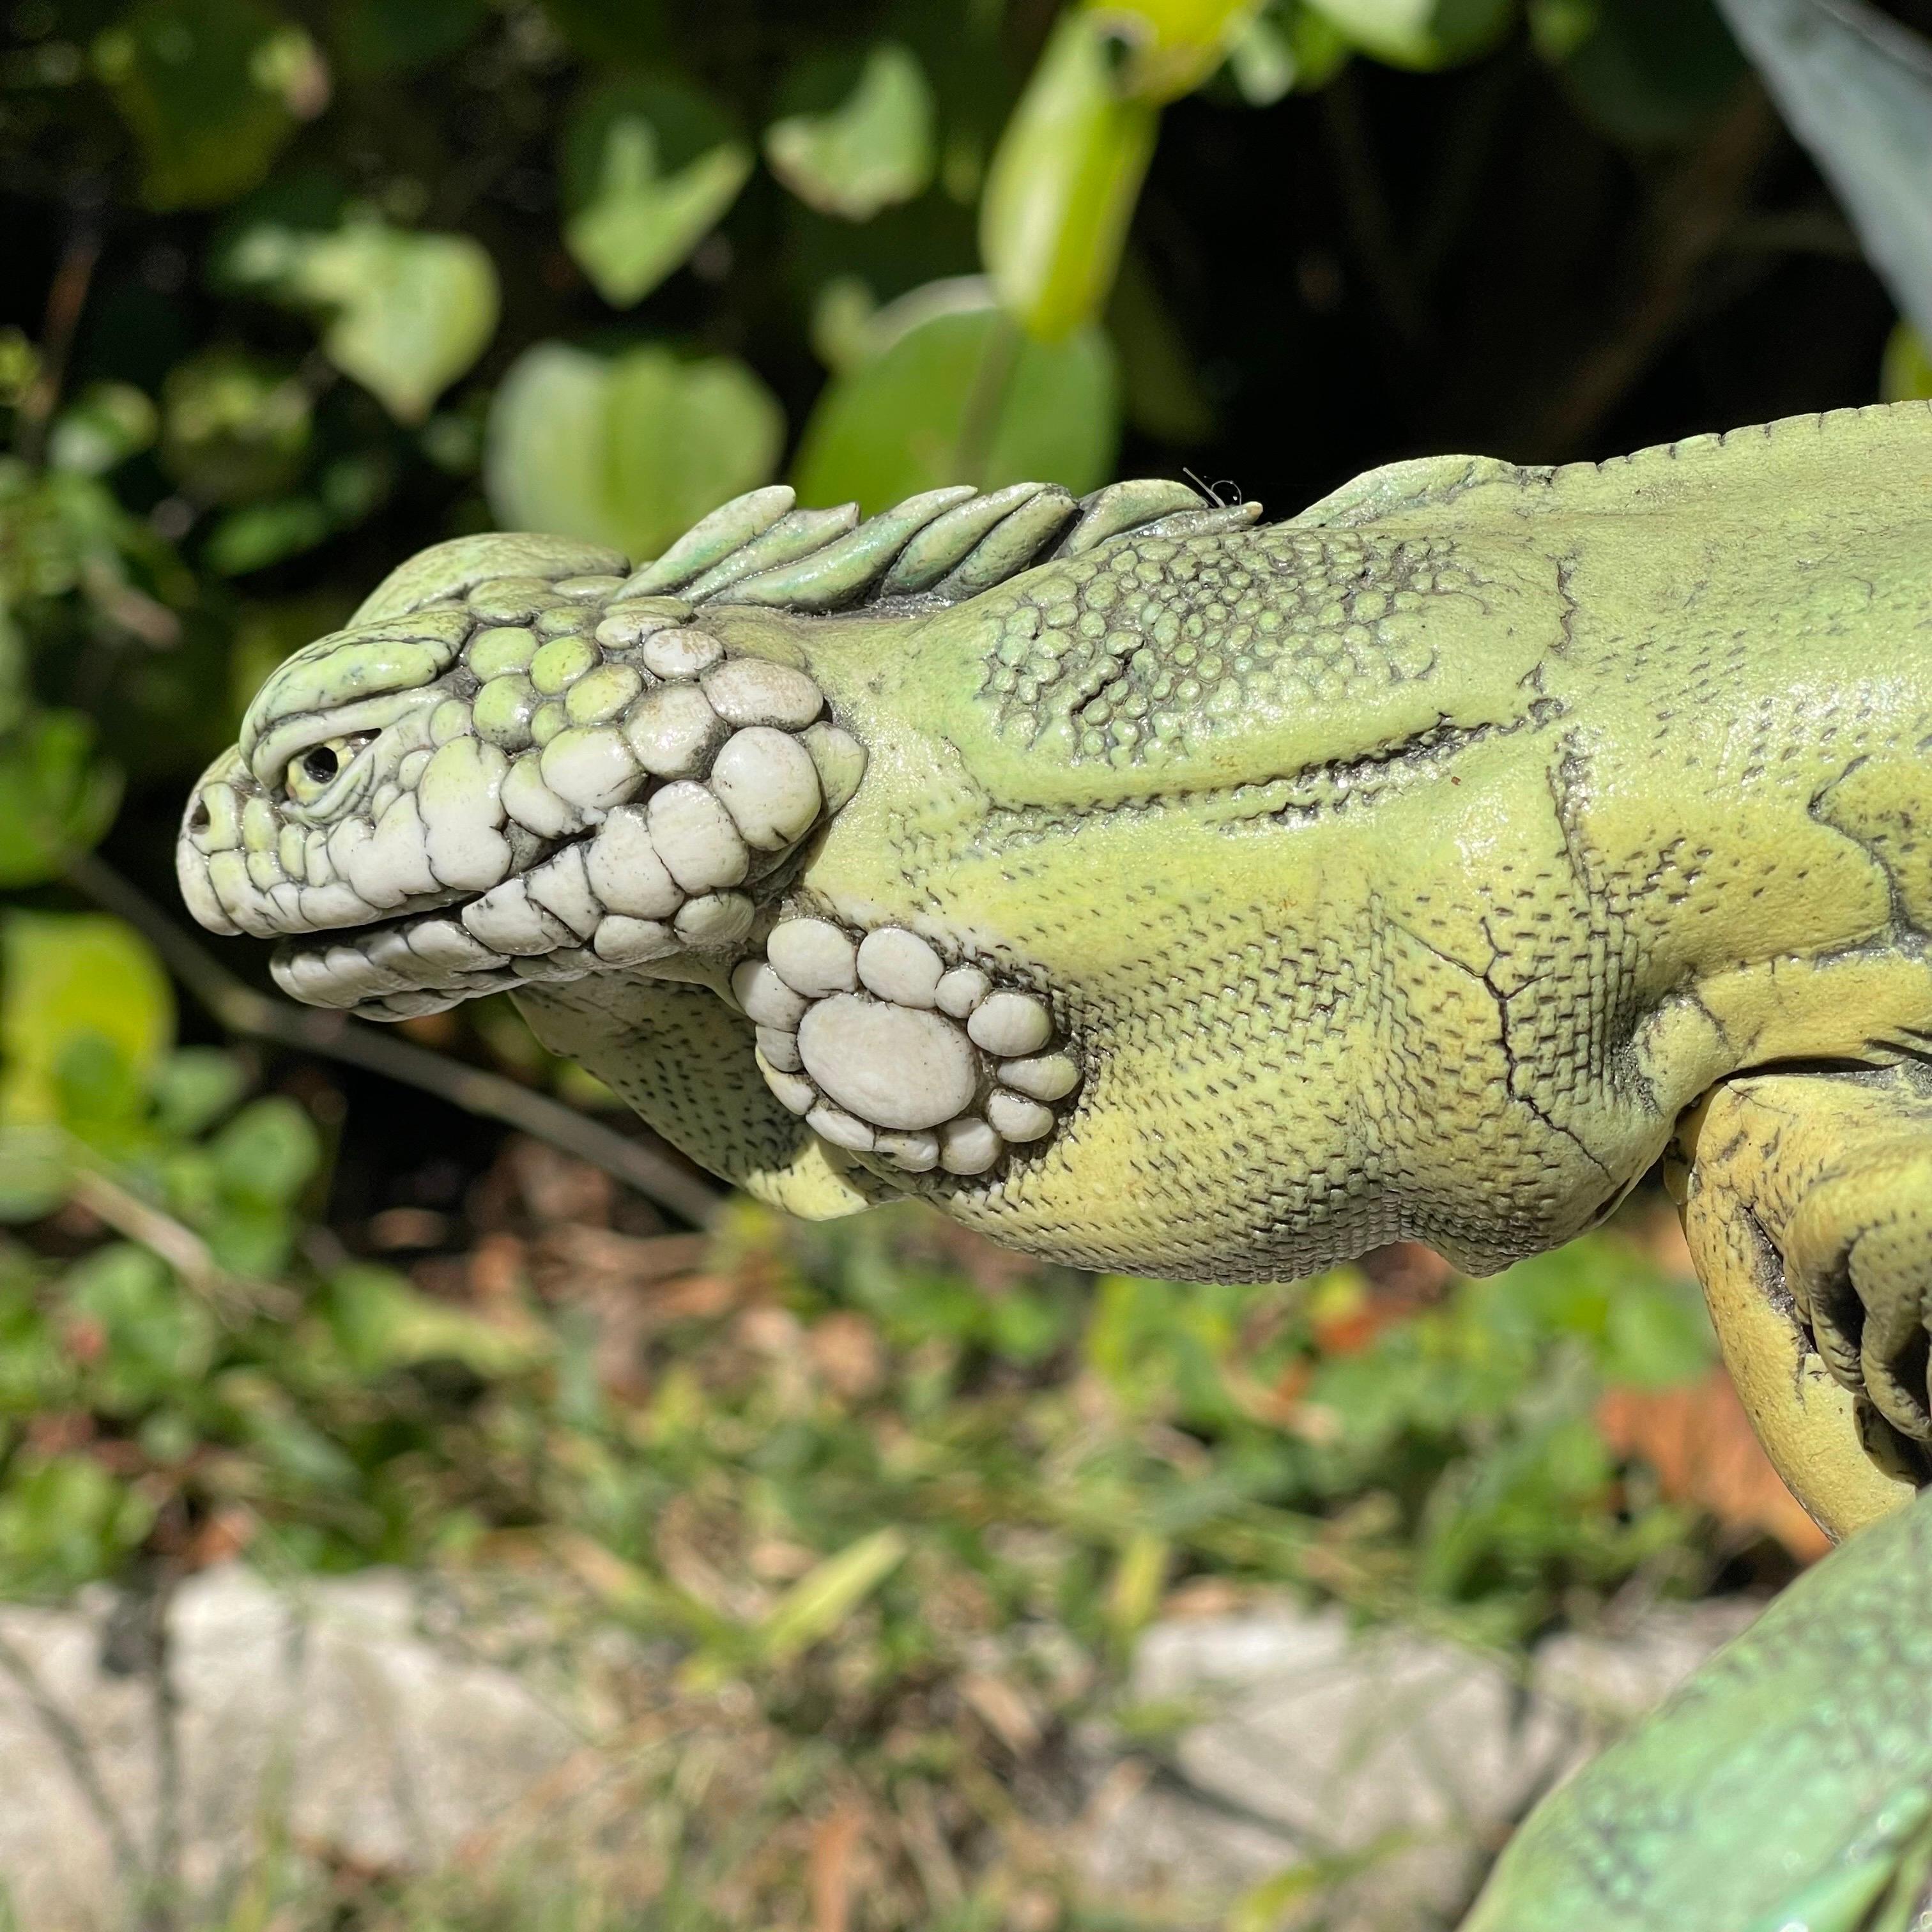 To confront her childhood fear of reptiles, Surving sculpted an iguana, which proved to be an epiphany that would lead her to a life of sculpting hyper-realistic reptiles. From miniatures to larger-than-life installations for museums and Disney